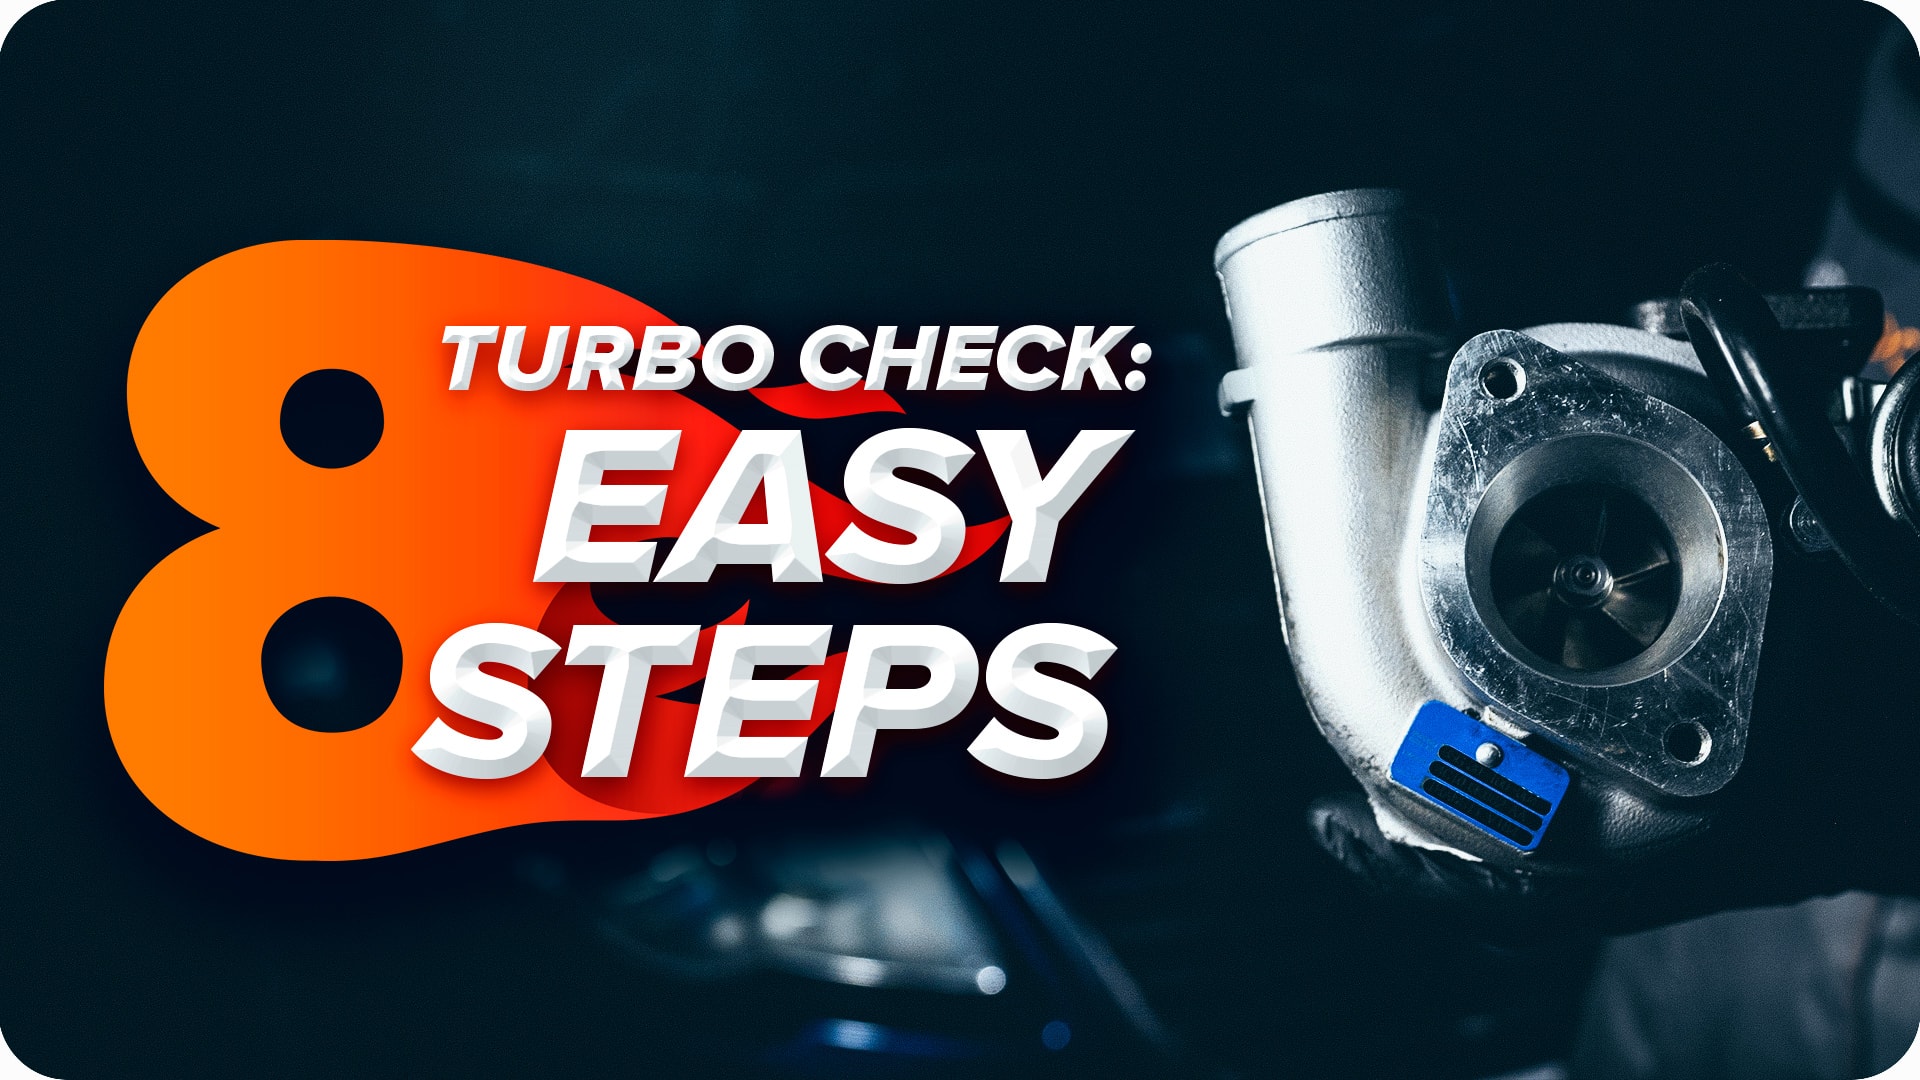 How to check a turbocharger